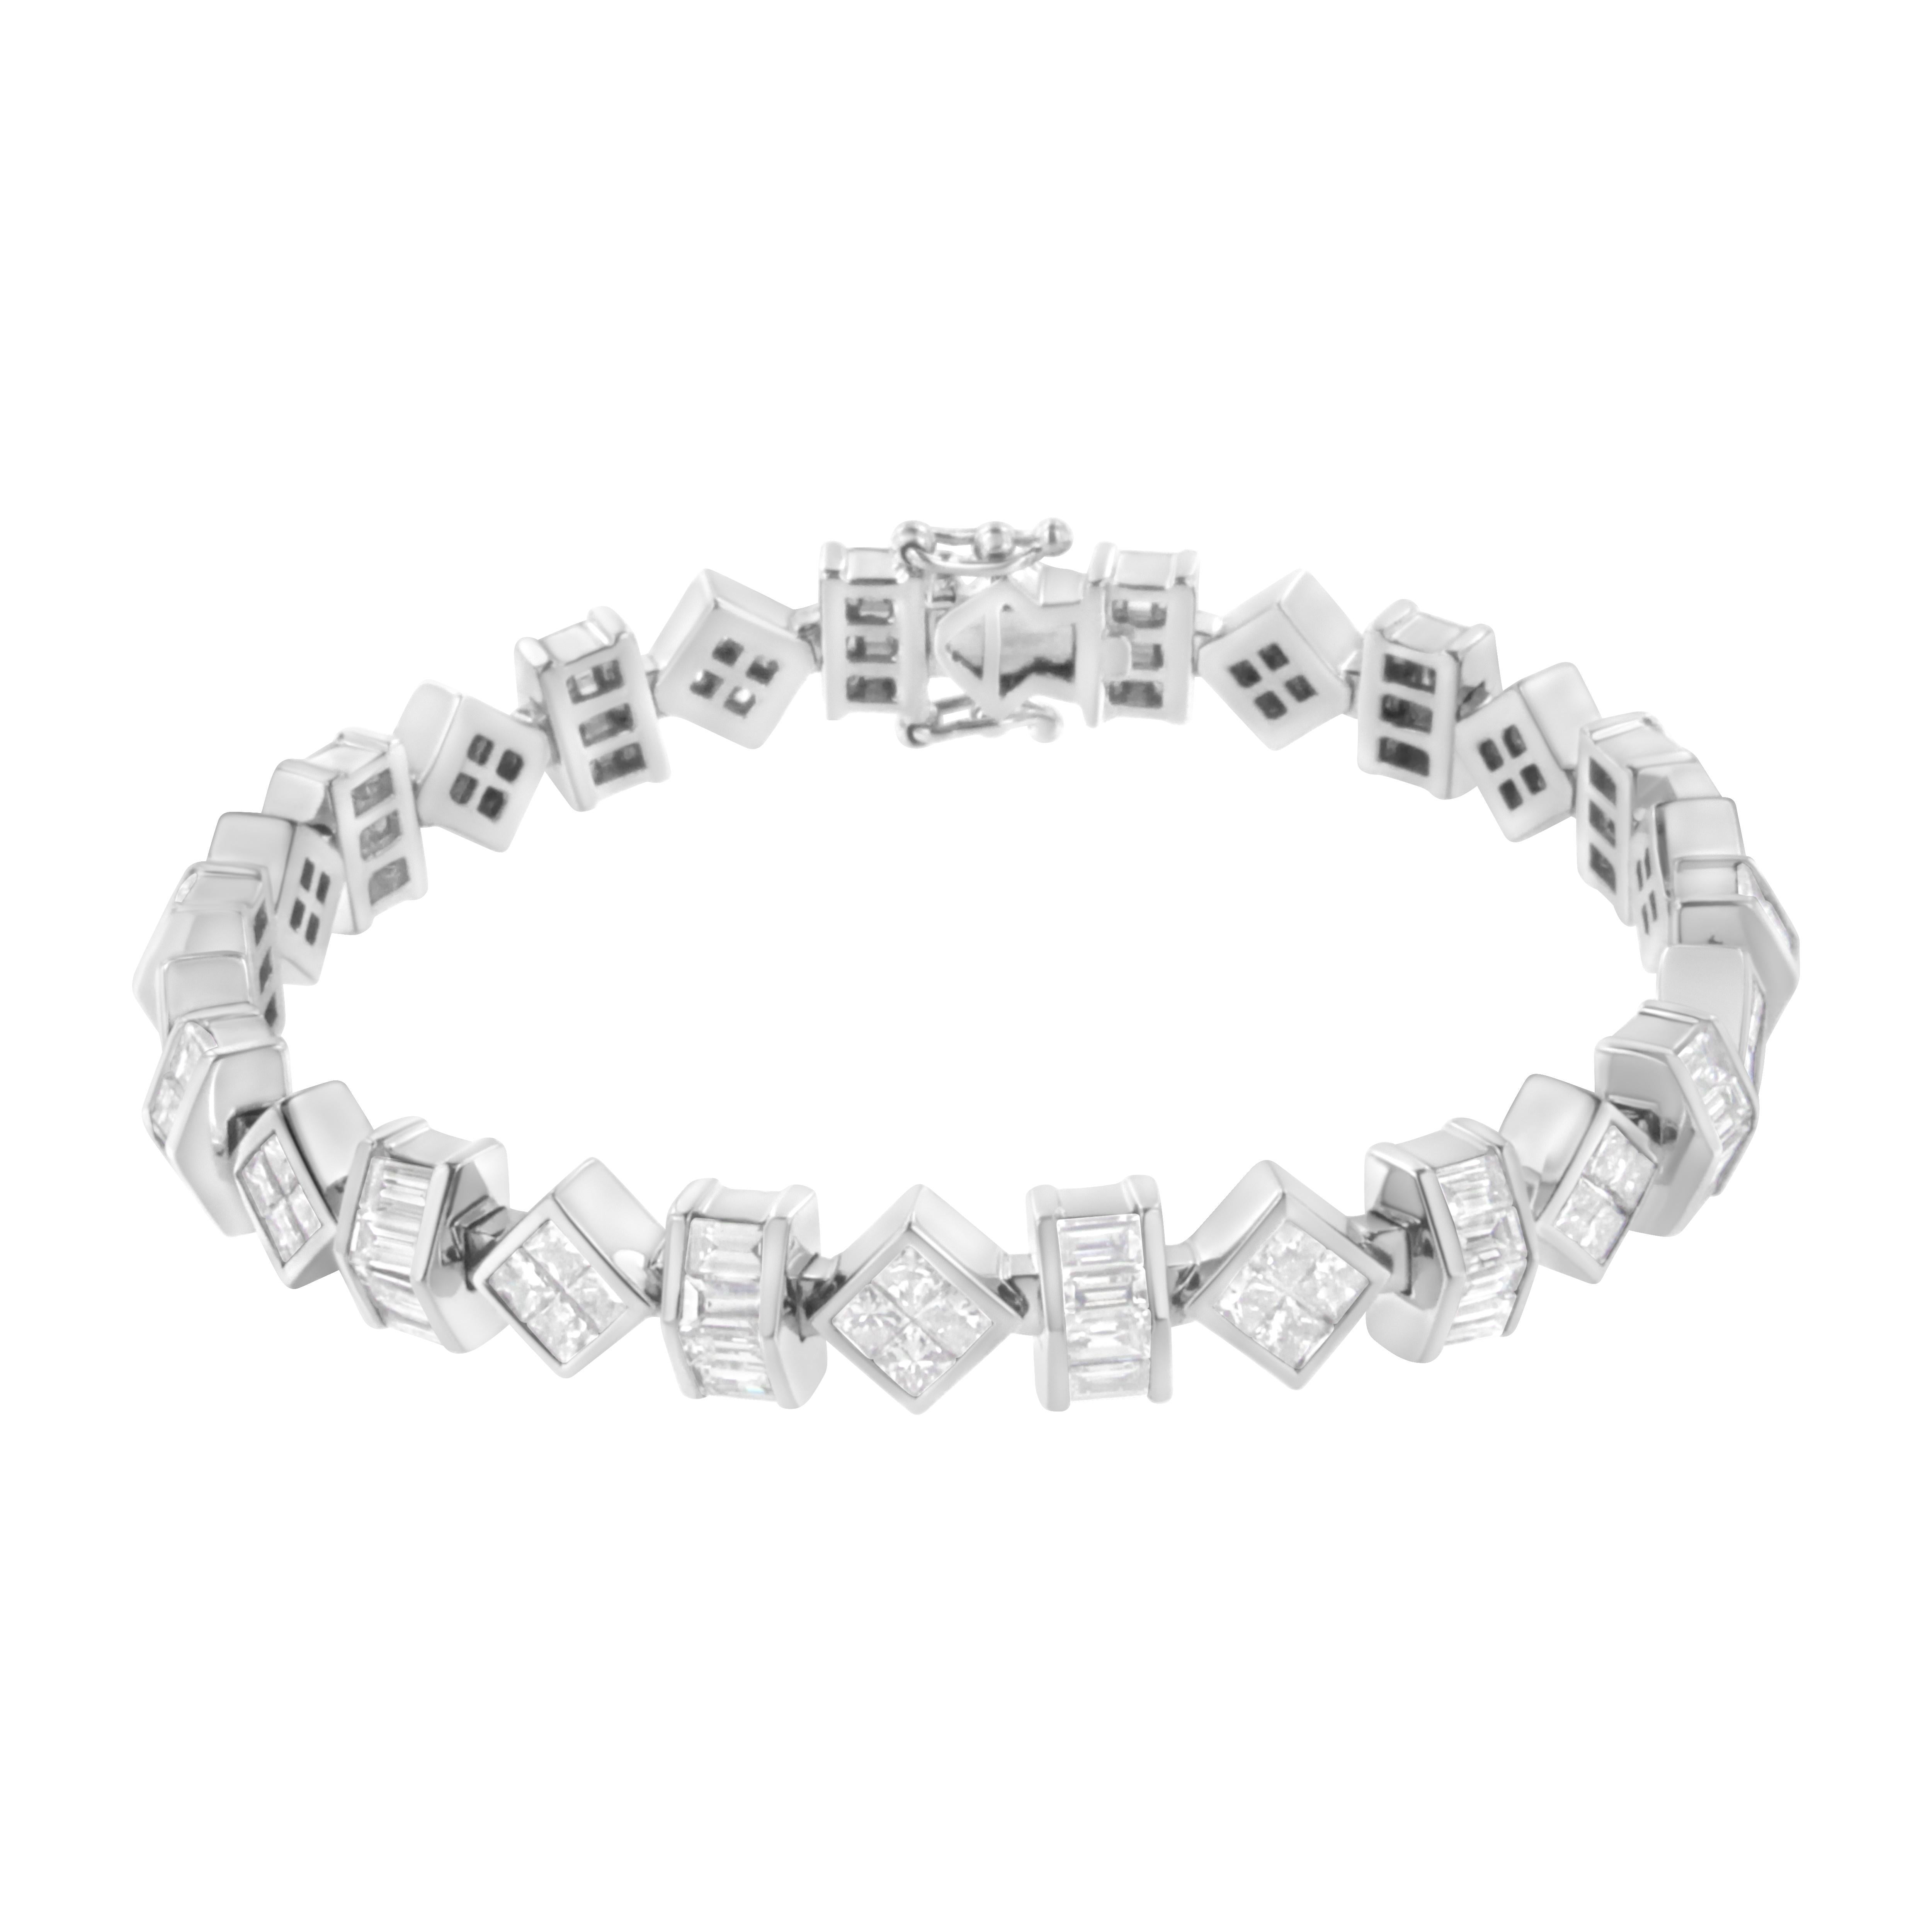 Show all your love to the lady love in your life by presenting her this uniquely designed Diamond Bracelet on any special occasion. Spectacular yet graceful, it is crafted from 14 karats of white gold and polished high for radiance. An alternate